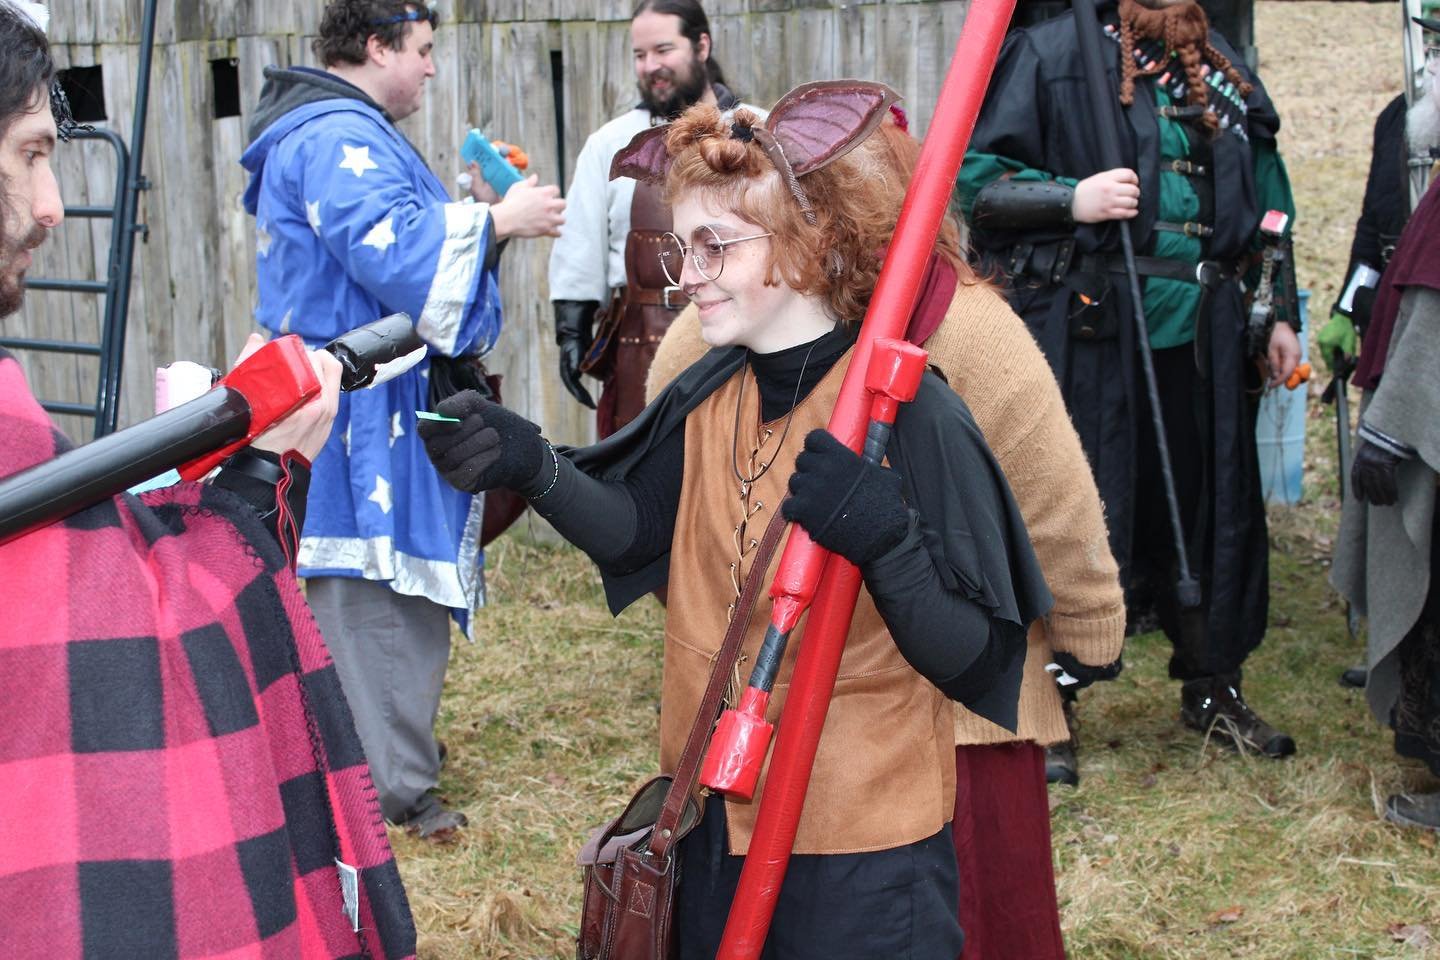 Thus season 3 begins. The Protectorate are held at bay as threats emerge from the depths of the Cairn. Next event: May 10th-12th, see you soon!
🪨
🪨 
🪨 
#larp #larpcostume #alliancelarp #alliancenepa #larpersofinstagram #larpers #larplife #liveacti